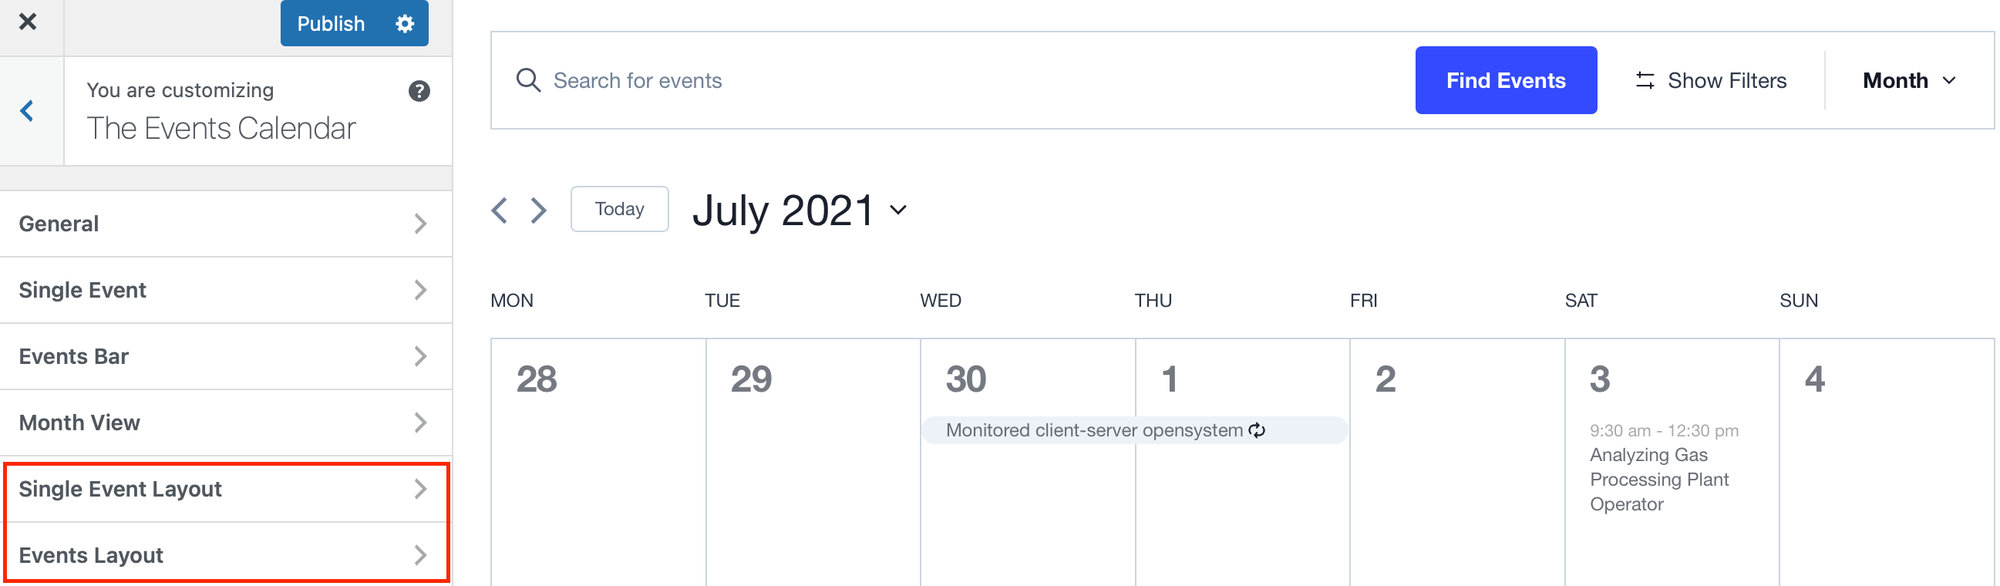 Showing the WordPress Customizer with the calendar month view open. The customizer options are in a left panel with tabs highlighted for Single Event Layout and Events Layout.